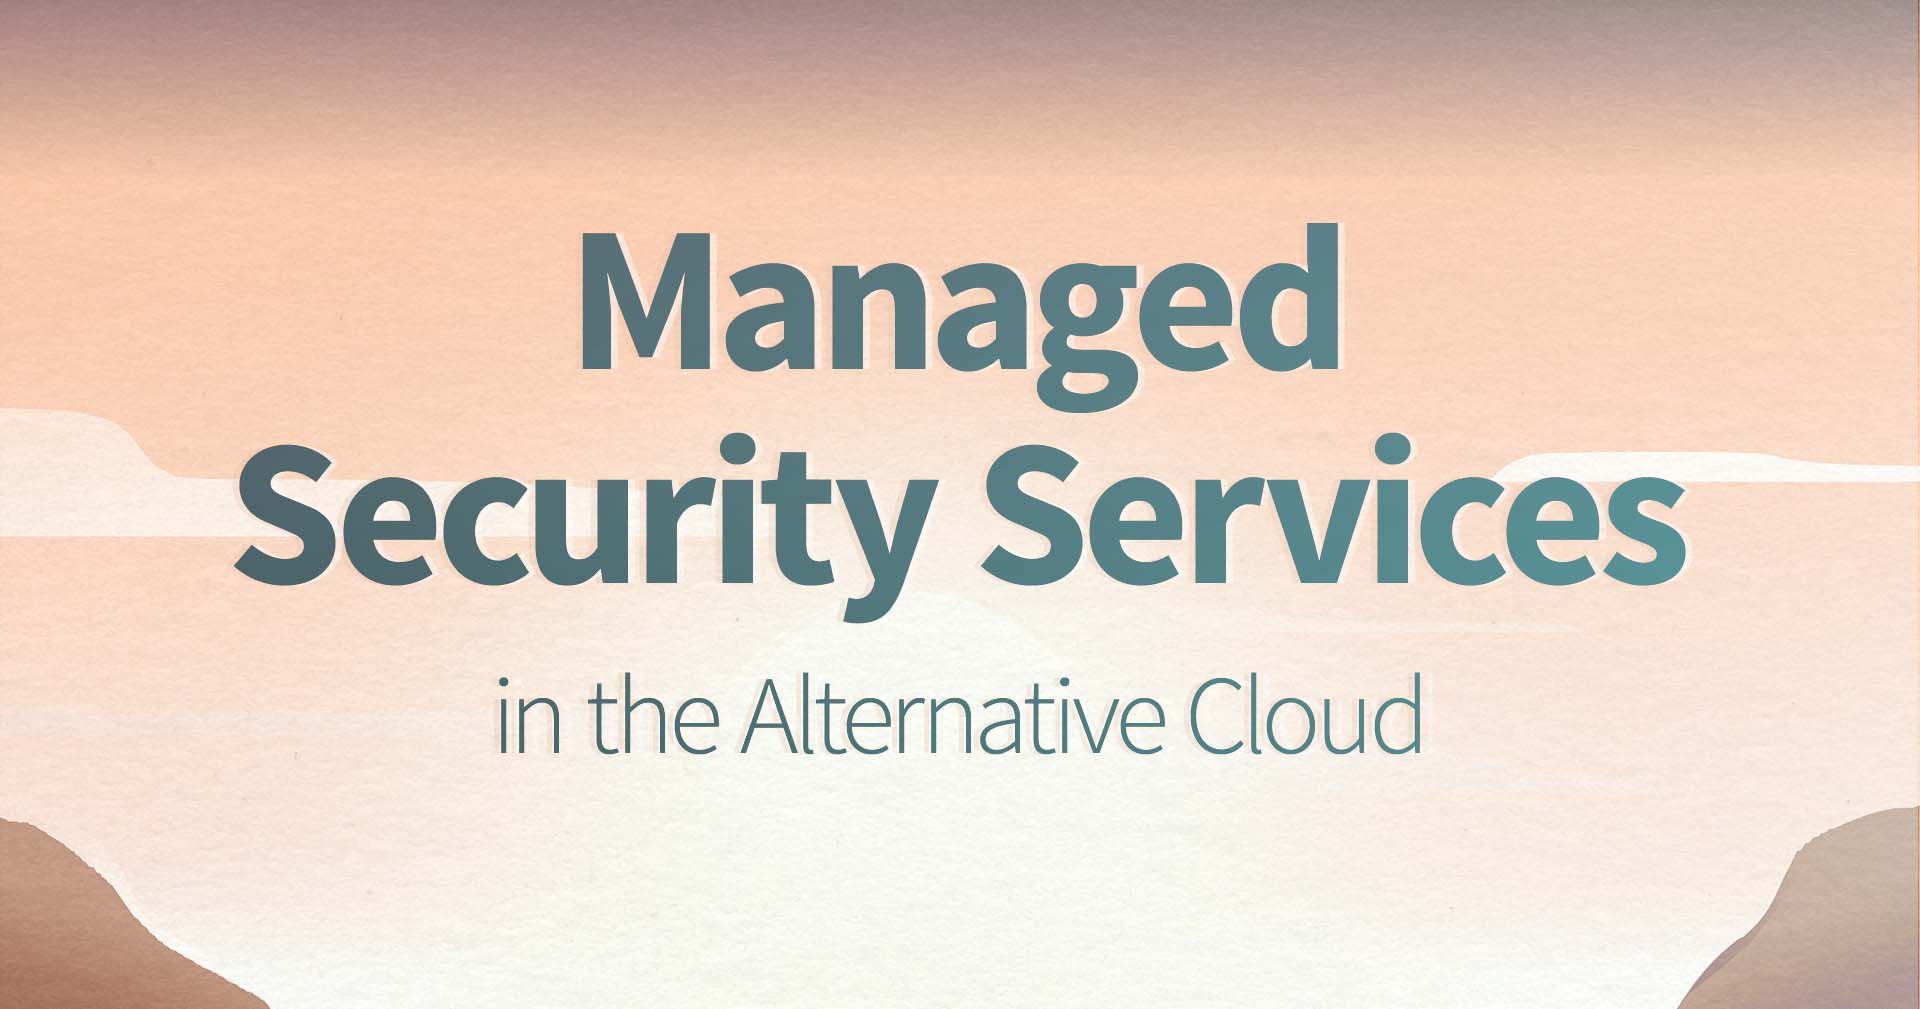 Managed Security Services in the Alternative Cloud